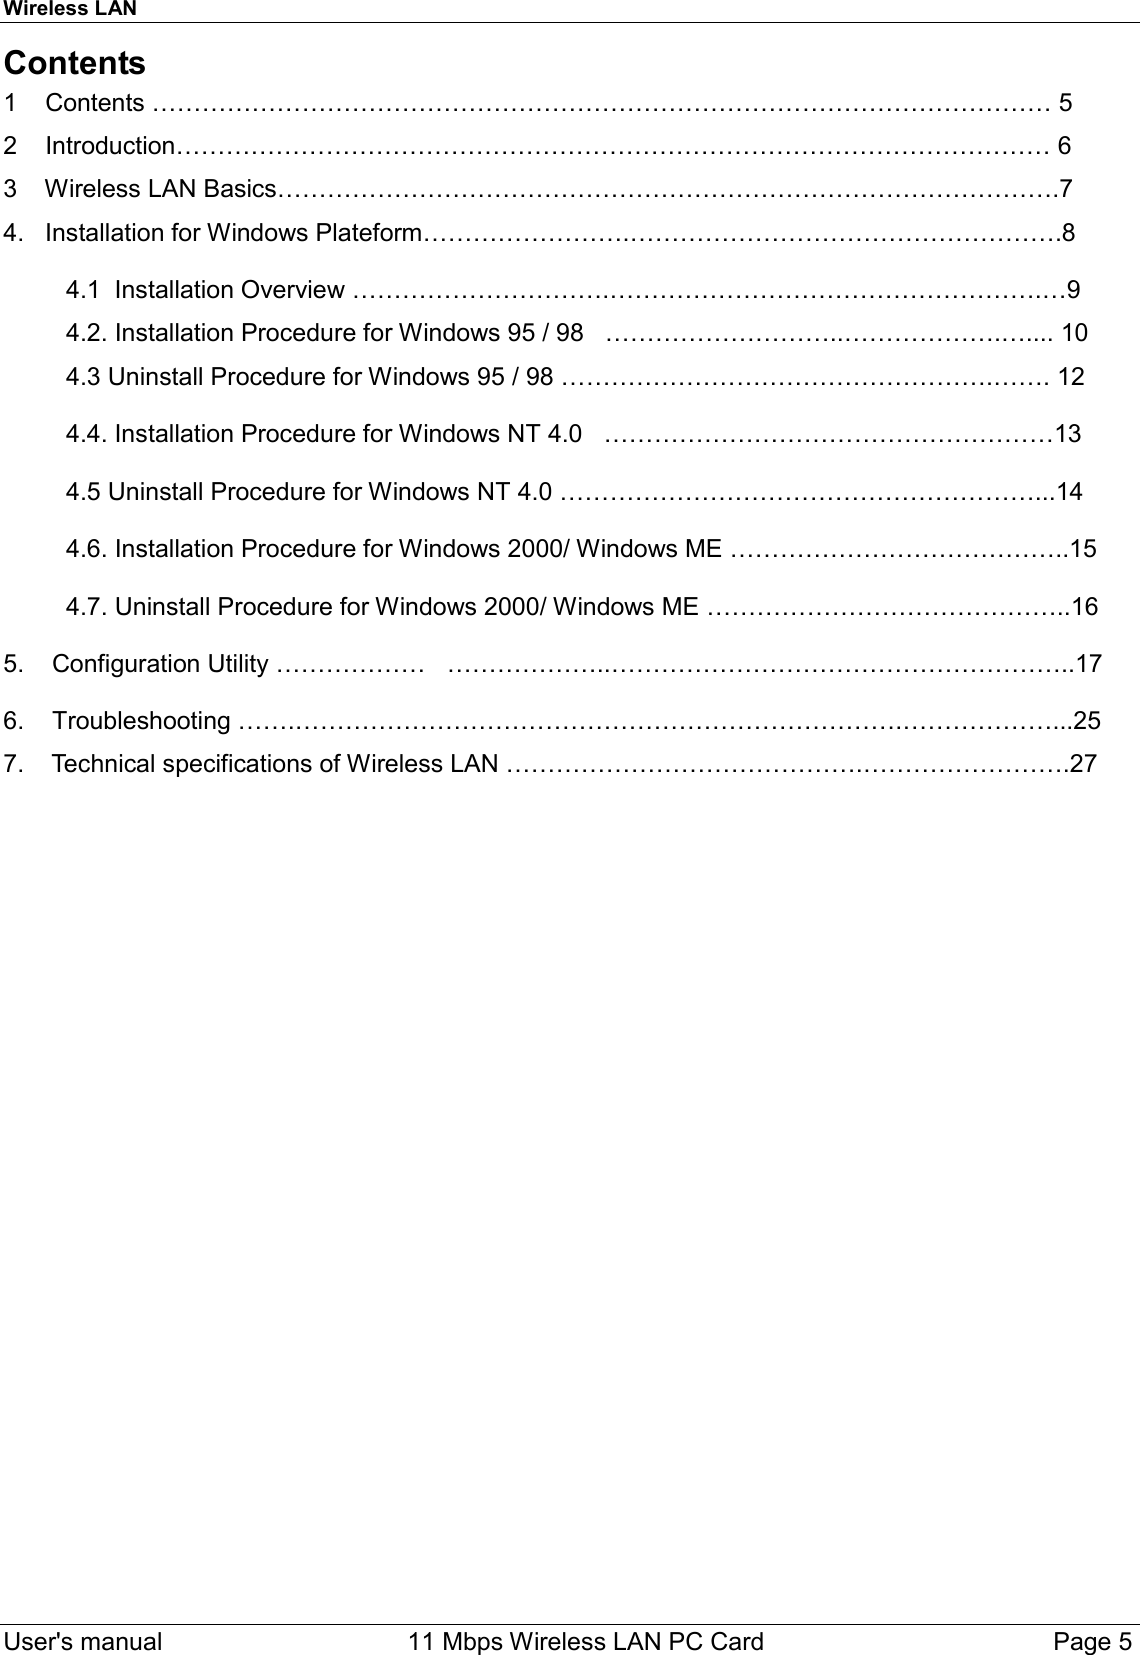 Wireless LAN     User&apos;s manual     11 Mbps Wireless LAN PC Card        Page 5  Contents 1    Contents ……………………………………………………………………………………………… 5 2    Introduction…………………………………………………………………………………………… 6 3    Wireless LAN Basics………………………………………………………………………………….7 4.   Installation for Windows Plateform…………………….…………………………………………….8           4.1  Installation Overview ………………………….…………………………………………….…9          4.2. Installation Procedure for Windows 95 / 98   ………………………..……………….….... 10          4.3 Uninstall Procedure for Windows 95 / 98 …………………………………………….……. 12           4.4. Installation Procedure for Windows NT 4.0   ………………………………………………13           4.5 Uninstall Procedure for Windows NT 4.0 …………………………………………………...14           4.6. Installation Procedure for Windows 2000/ Windows ME …………………………………..15           4.7. Uninstall Procedure for Windows 2000/ Windows ME ……………………………………..16  5.    Configuration Utility ………………   ………………..………………………………………………..17  6.    Troubleshooting …….……………………………………………………………….………………...25 7.    Technical specifications of Wireless LAN …………………………………….…………………….27 